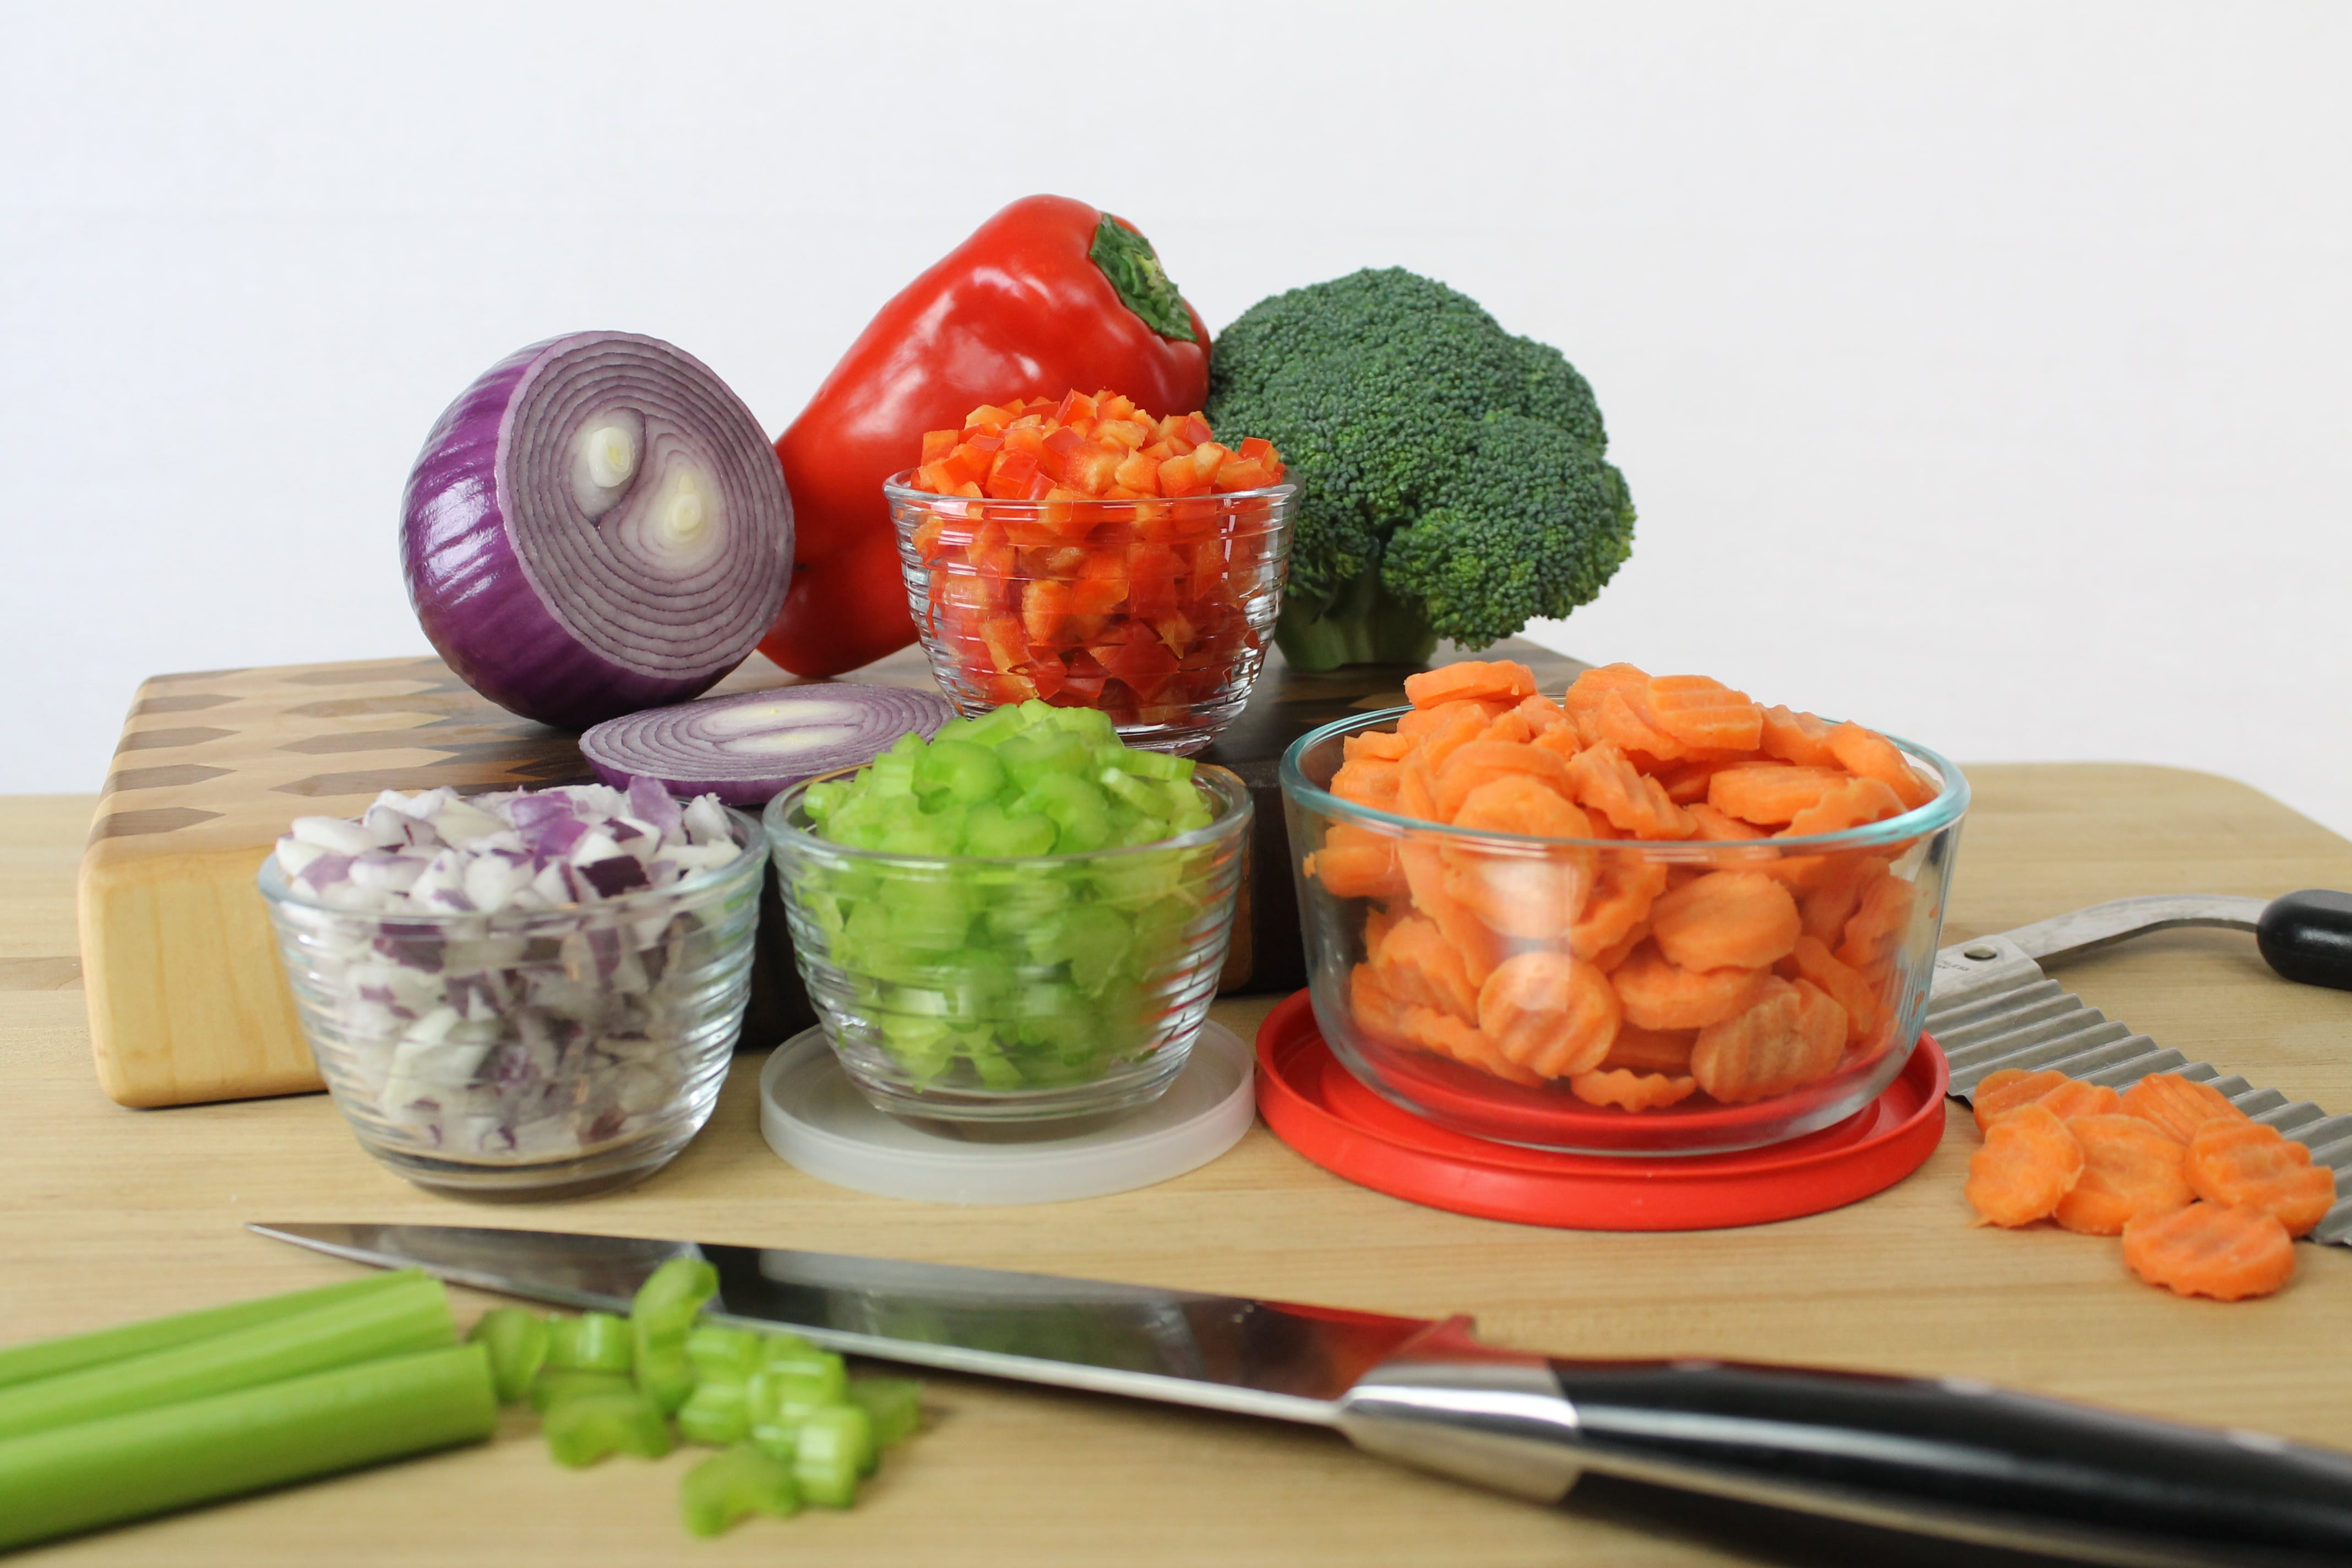 Chop onions, celery, pepper, carrots and other veggies ahead of time and store them in glass containers to make meal prep easy. 